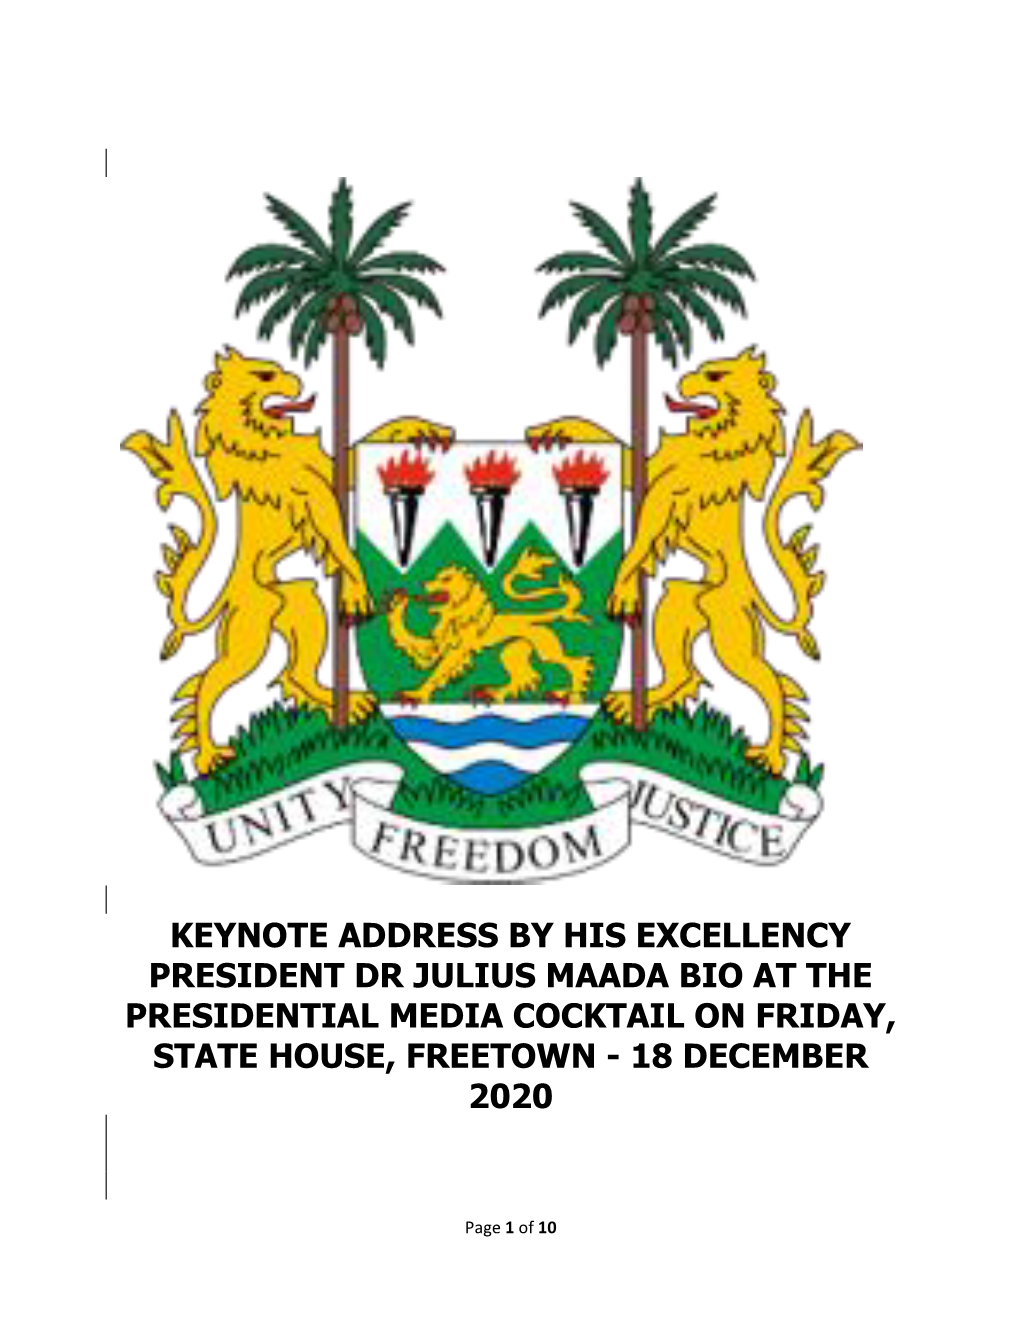 Keynote Address by His Excellency President Dr Julius Maada Bio at the Presidential Media Cocktail on Friday, State House, Freetown - 18 December 2020